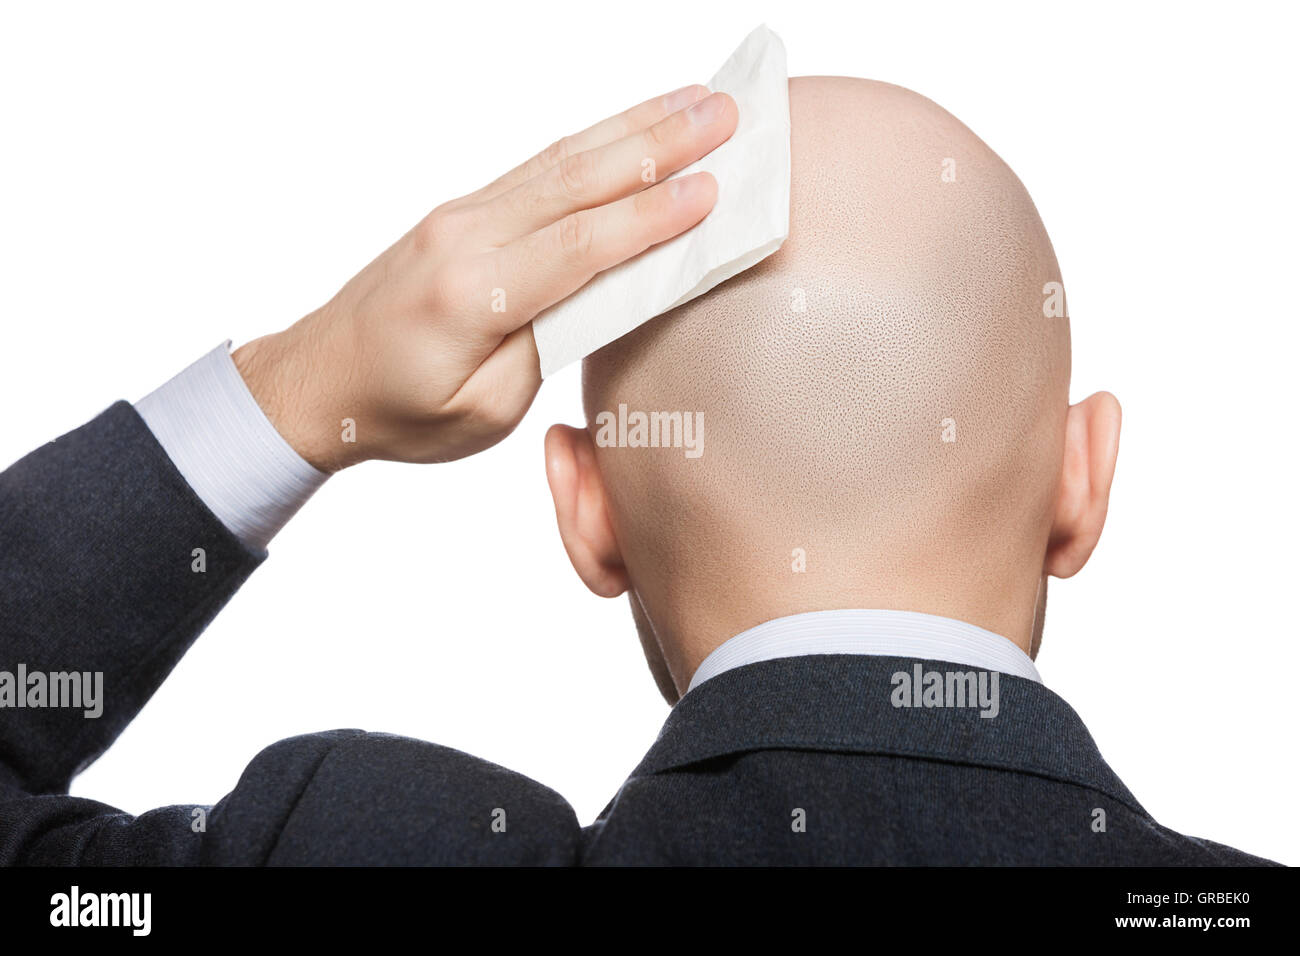 Hand holding tissue wiping or drying bald sweat head Stock Photo